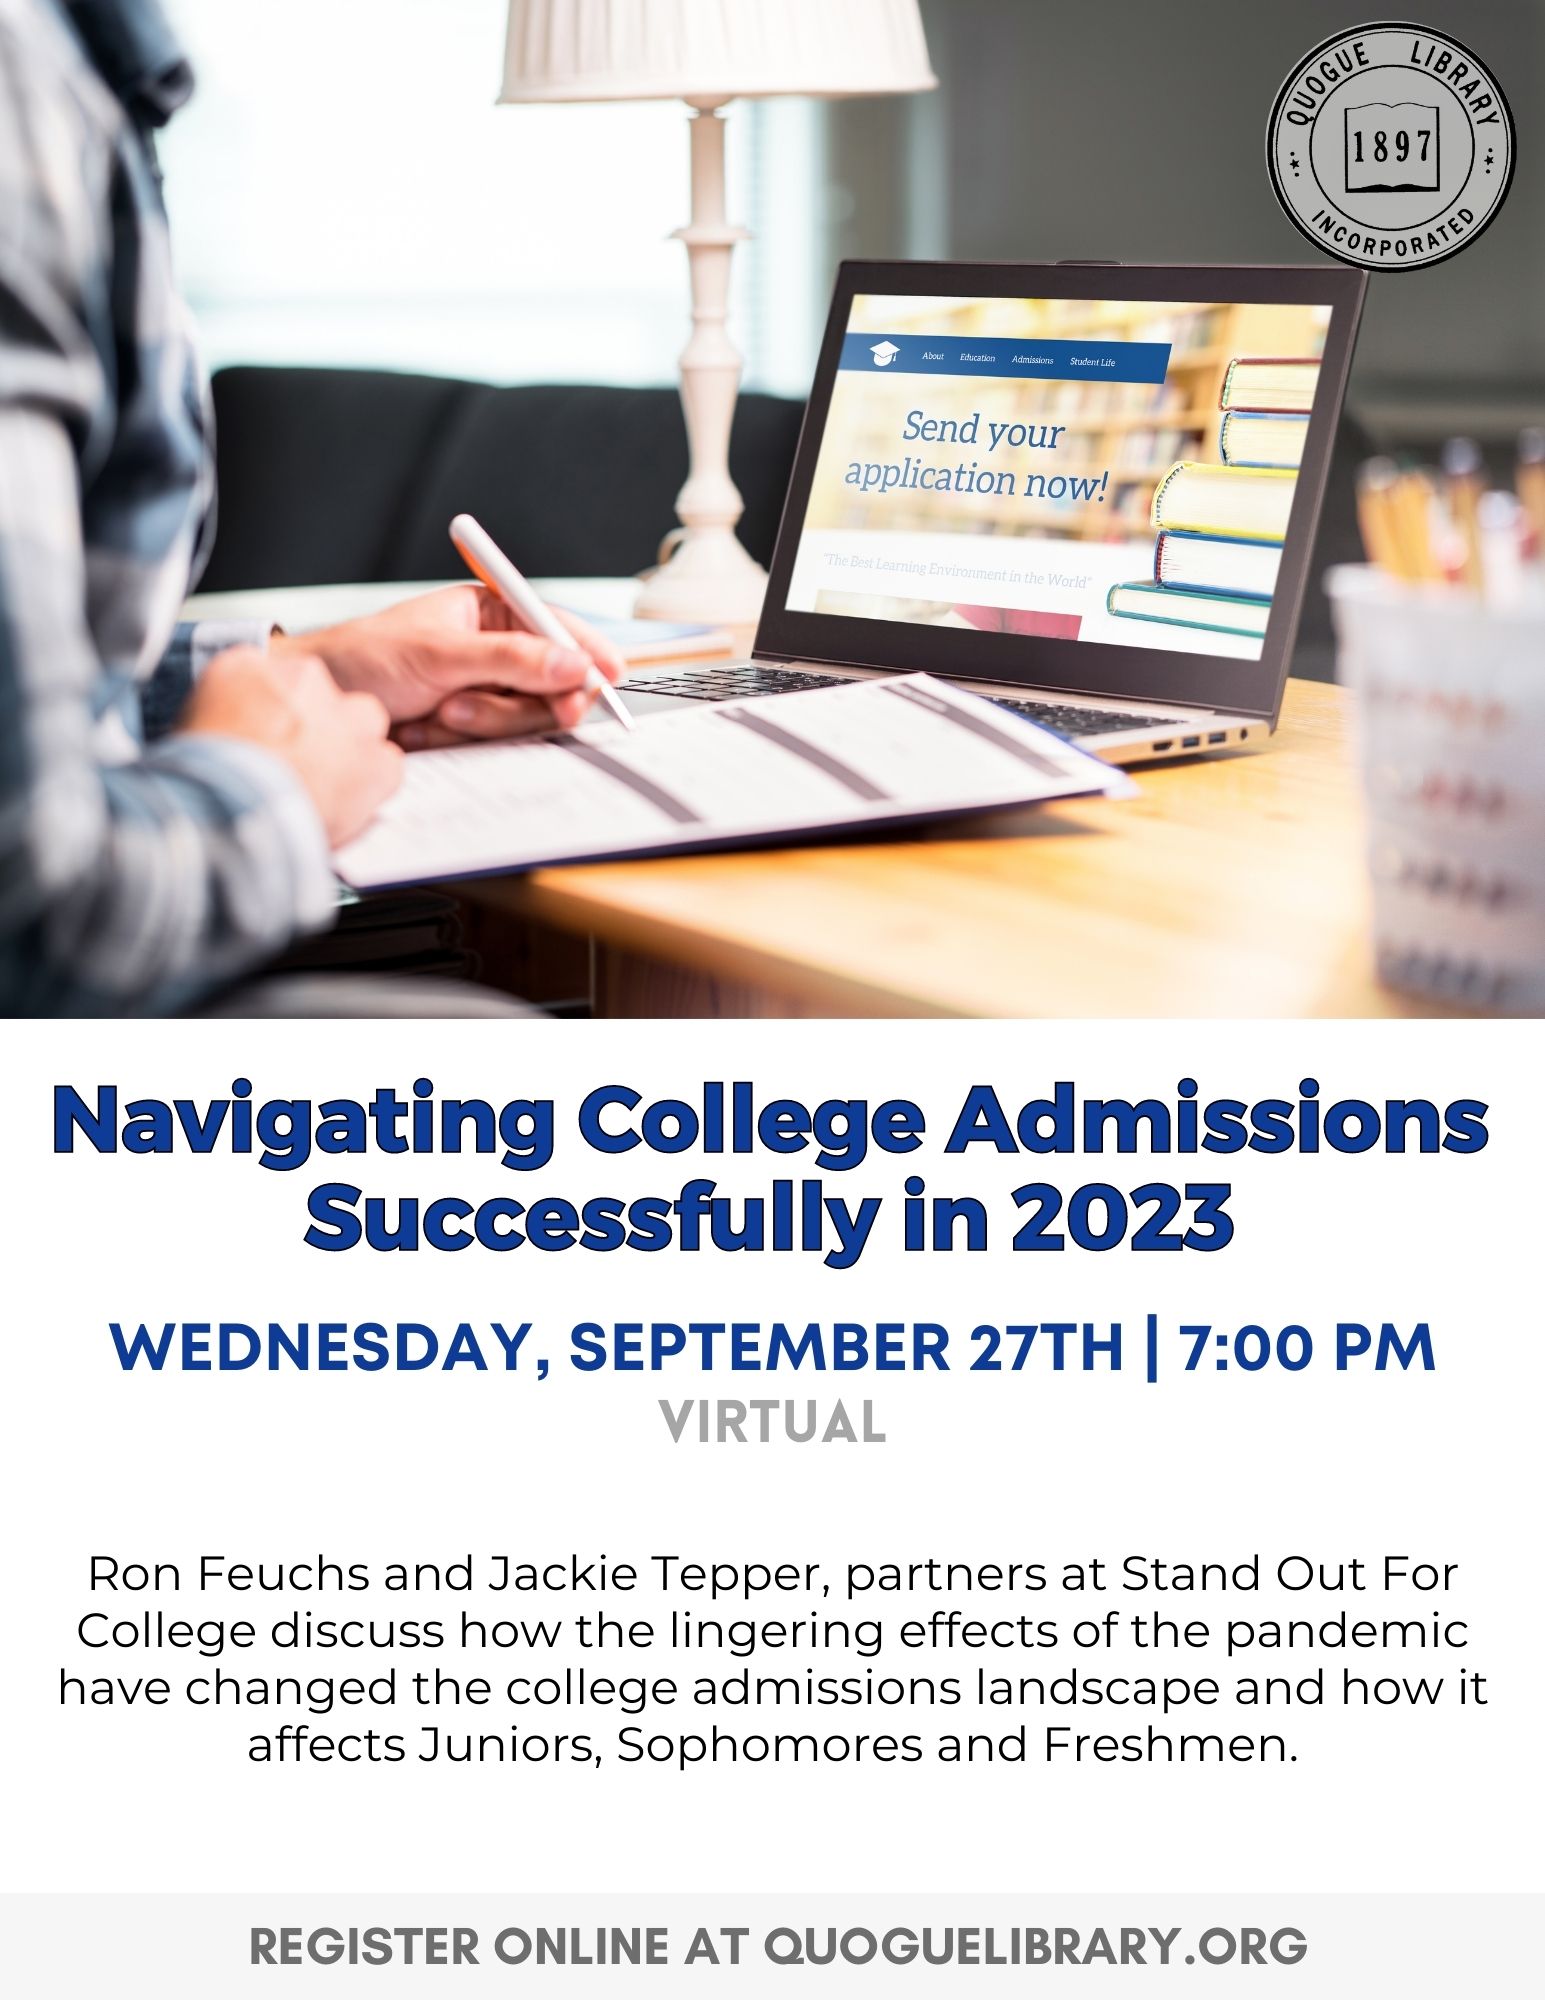 Navigating College Admissions Successfully in 2023